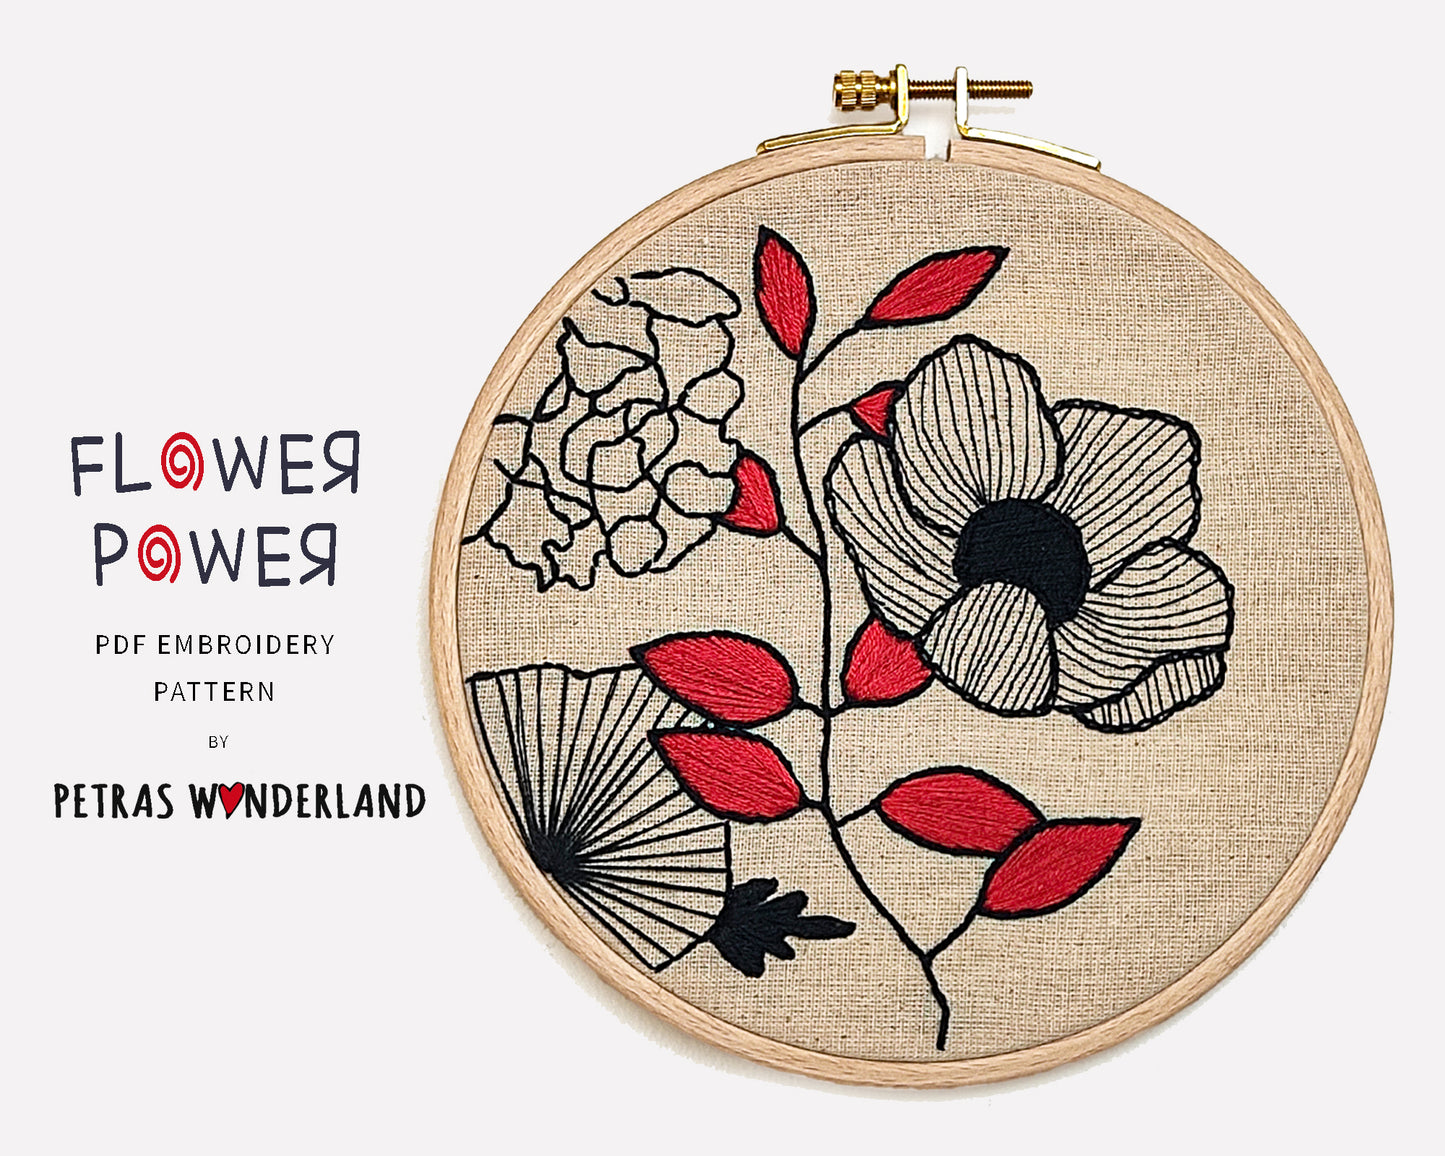 Flower Power - PDF embroidery pattern and tutorial